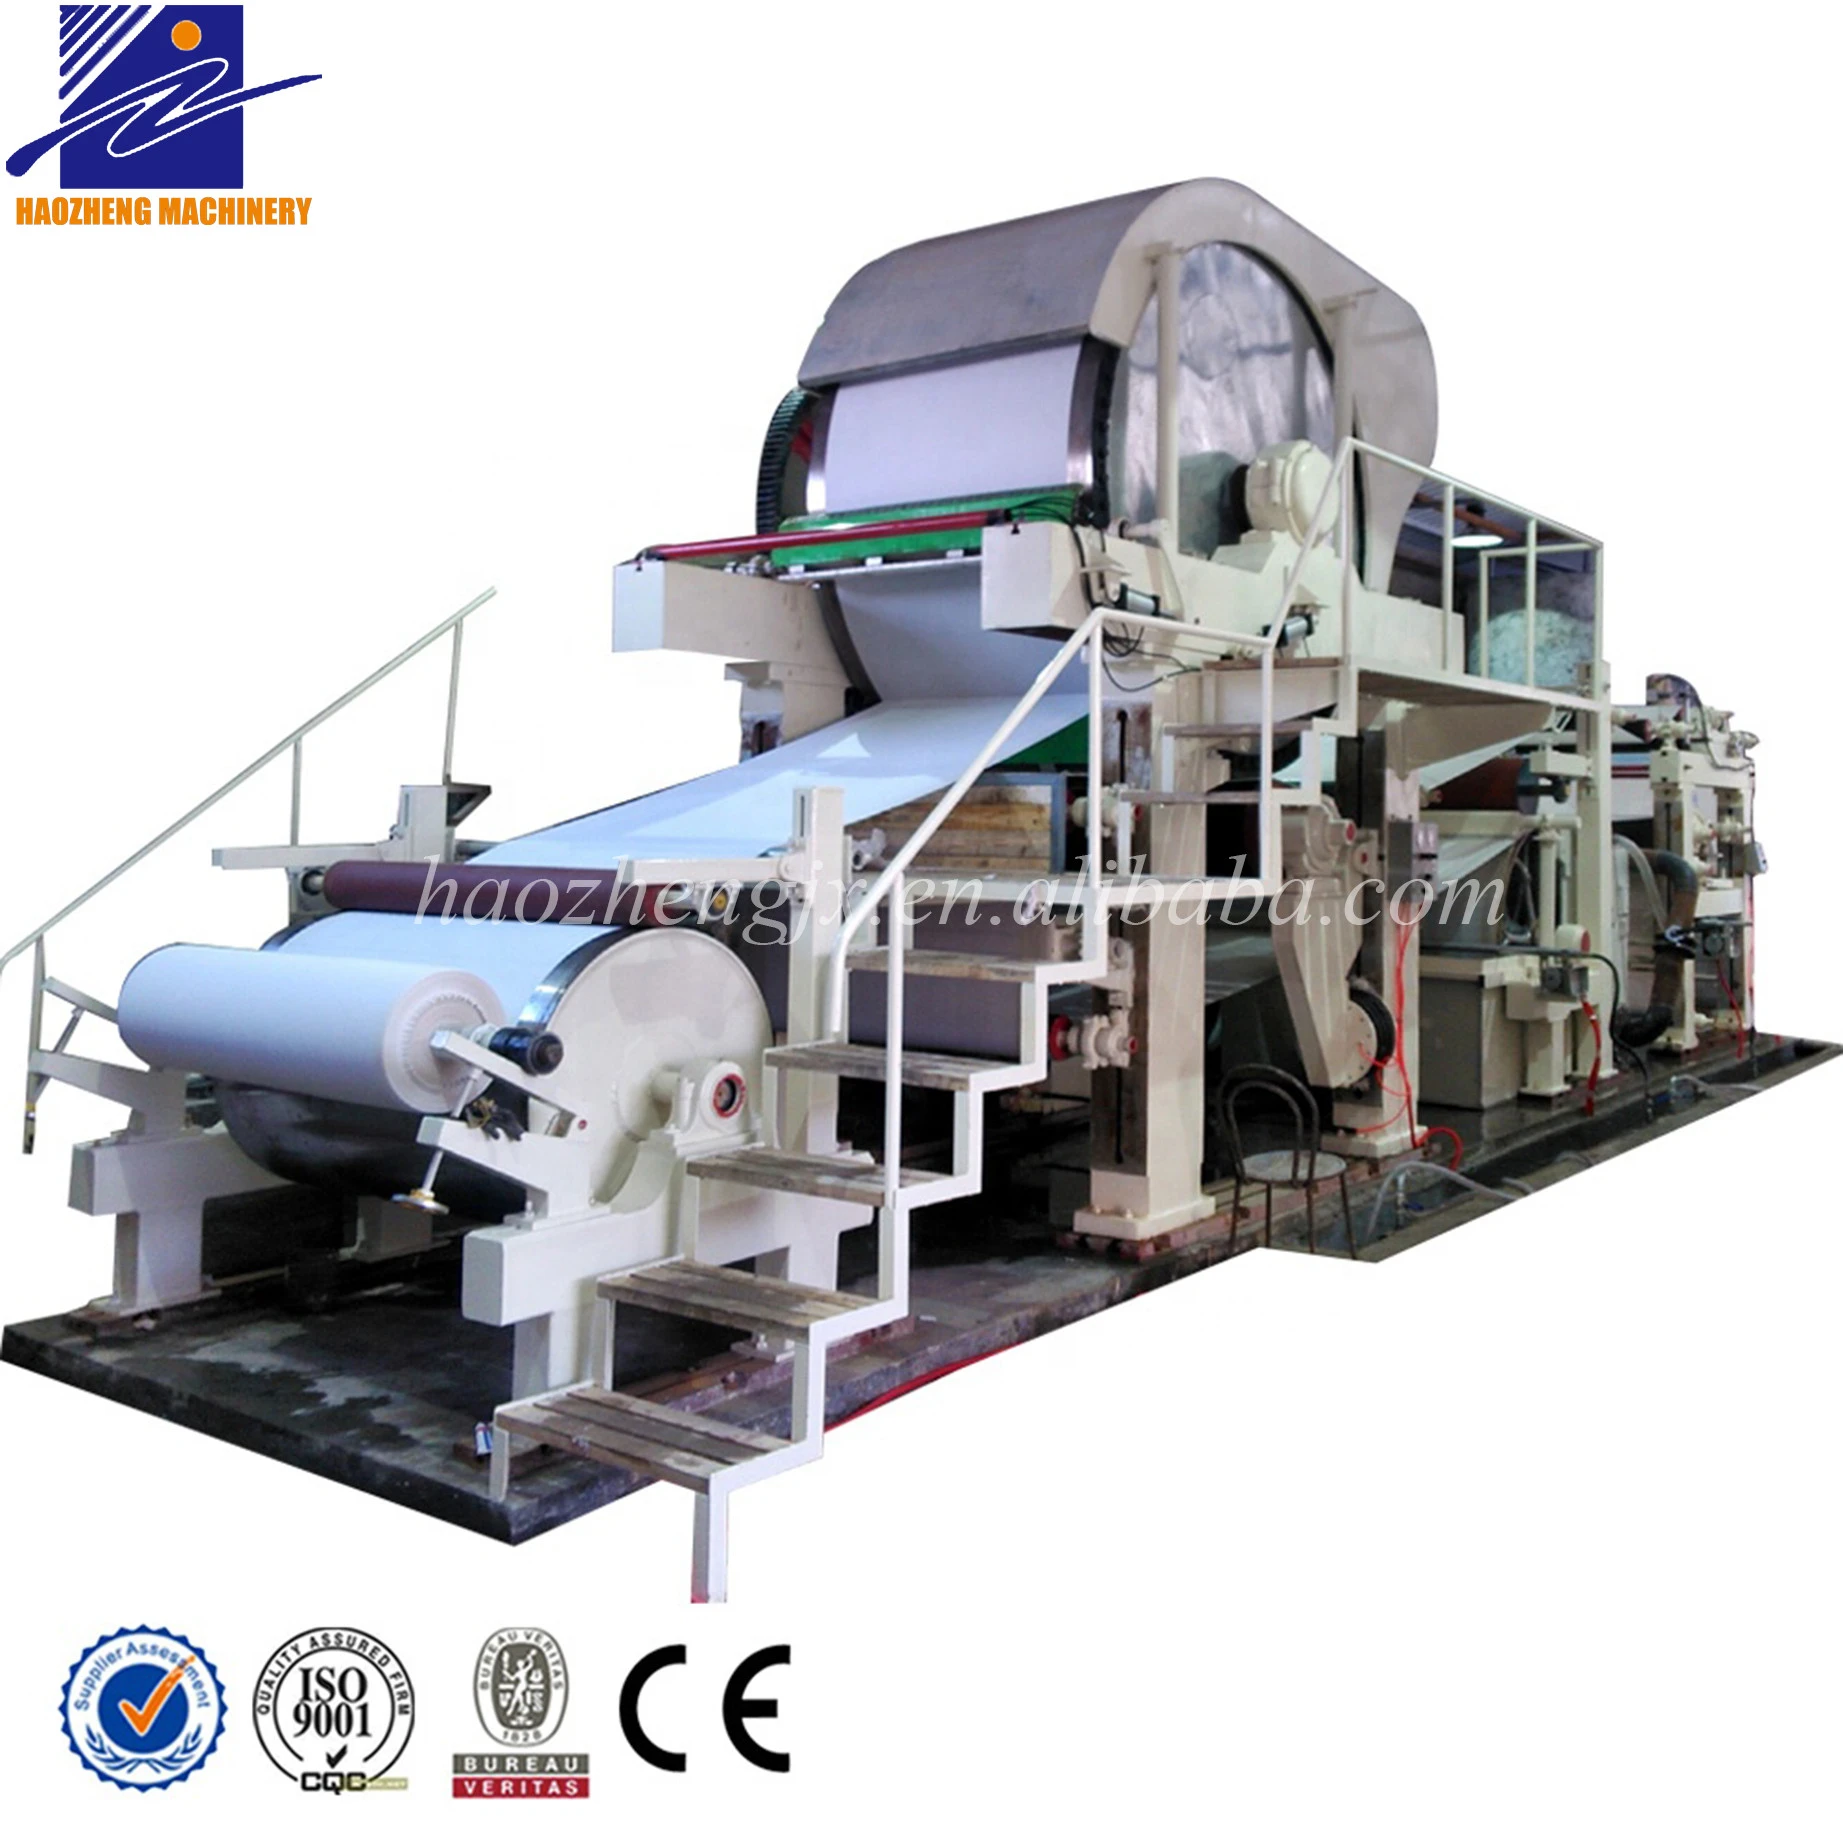 food packaging paper machine from raw materials wheat straw, cotton, wood pulp, bagasse pulp ,bamboo